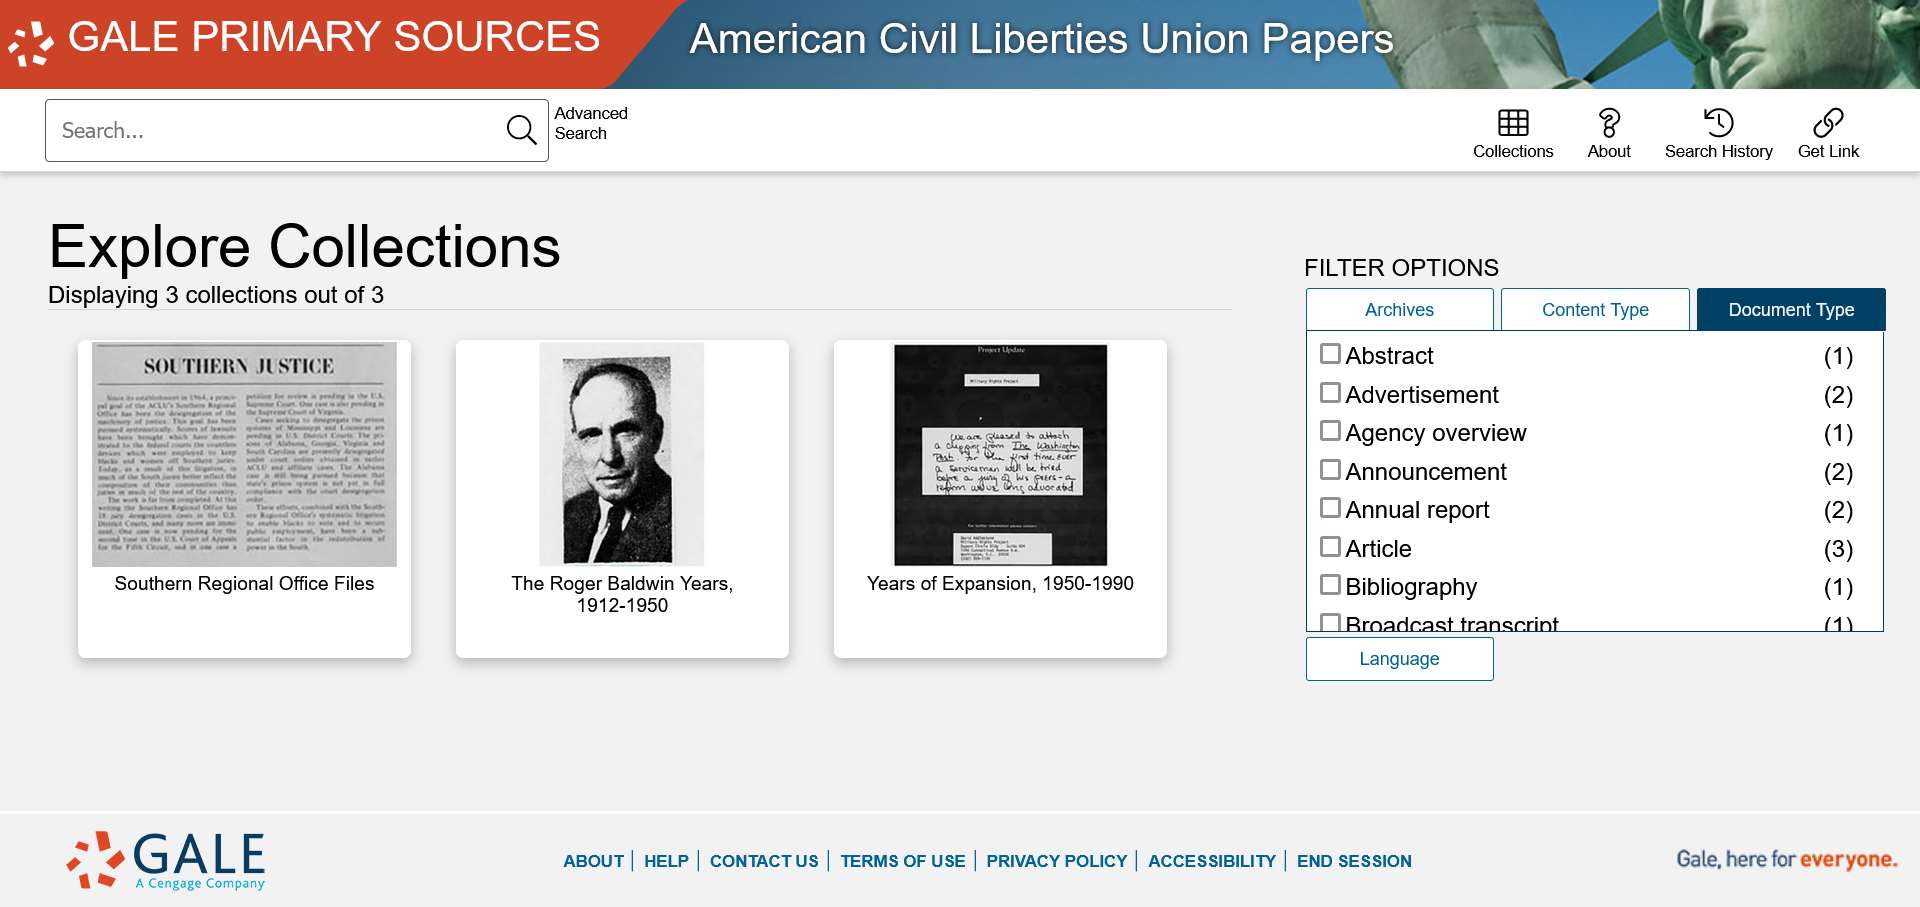 The Making of Modern Law: American Civil Liberties Union Papersのコレクション選択画面